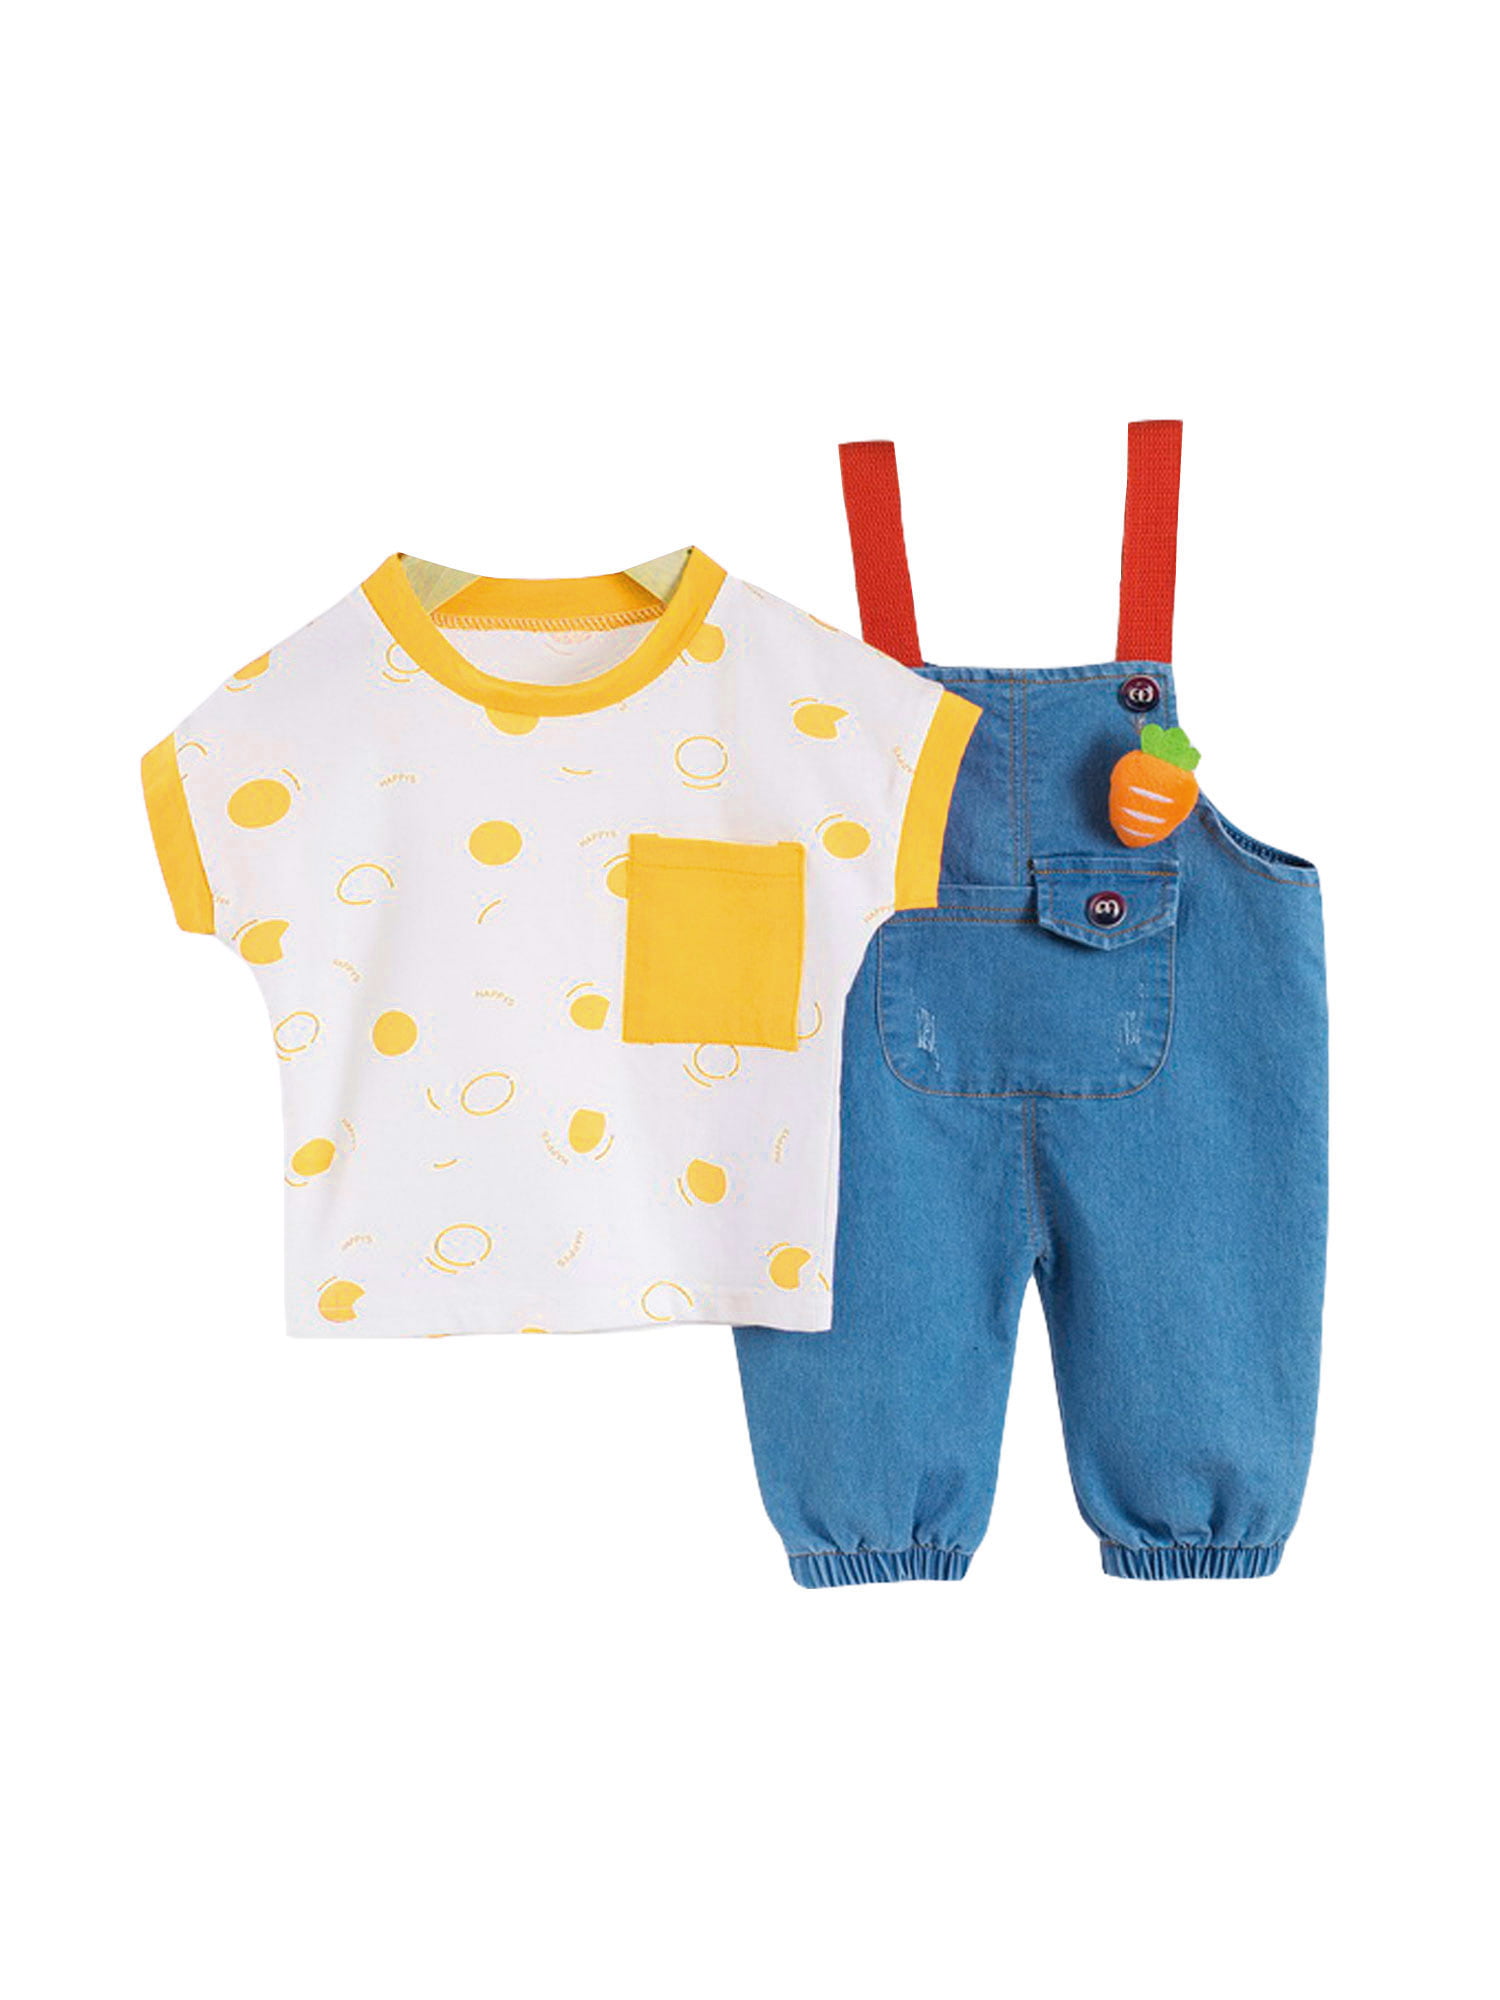 Baby Boys Clothes Set Toddler Kid Newborn Cartoon Short Sleeve T-Shirt Tops+Suspenders Rompers Overalls 2Pcs Summer Outfits 